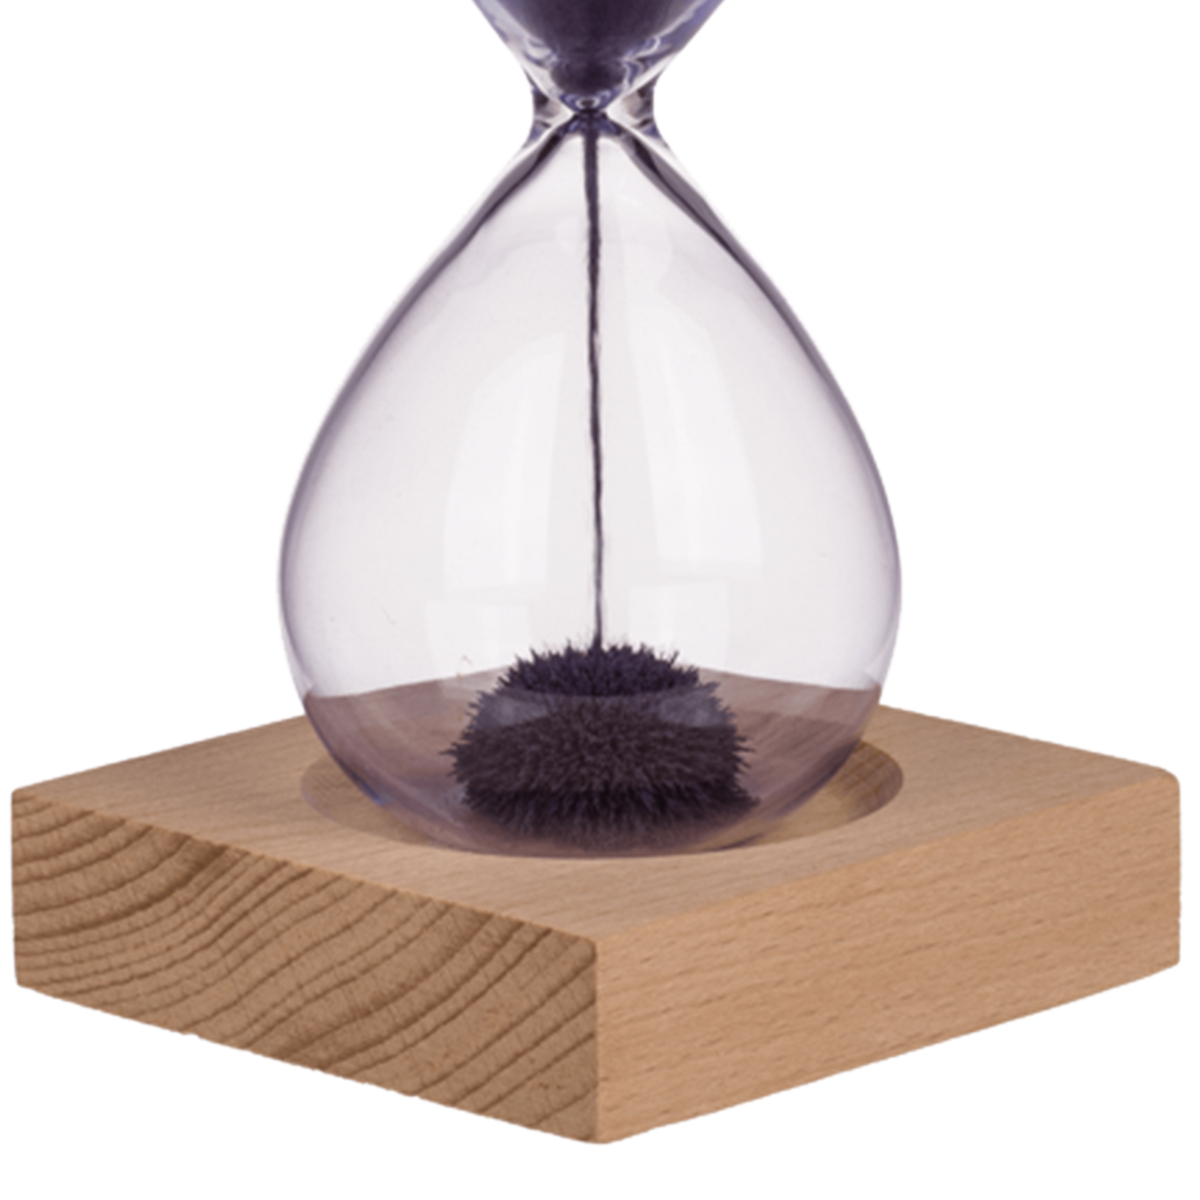 Magnetic decoration hourglass